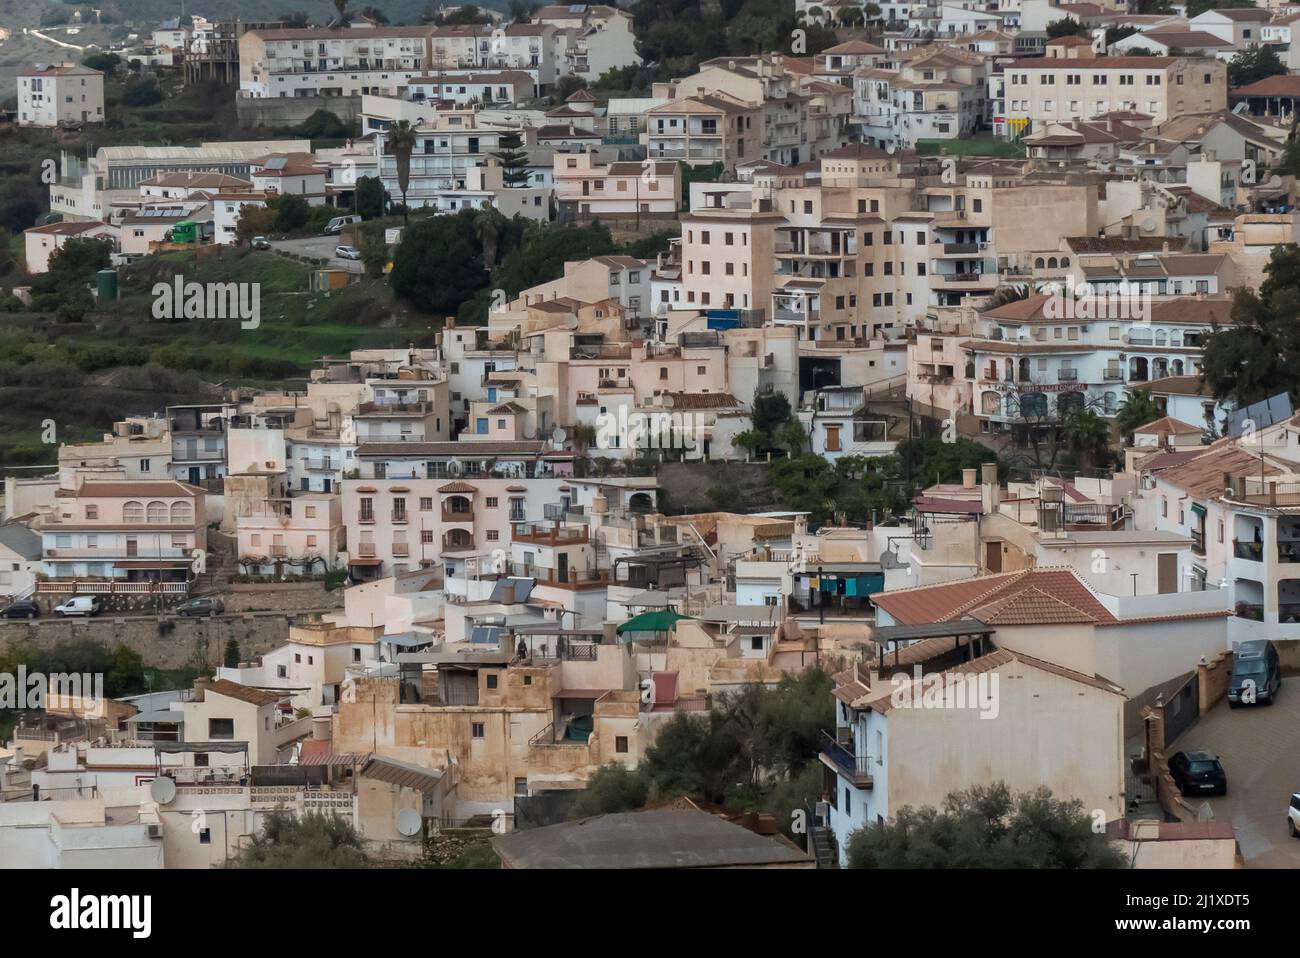 Andalucia is Spain: The after effects of Saharan dust (Calima) on the area round Competa Stock Photo